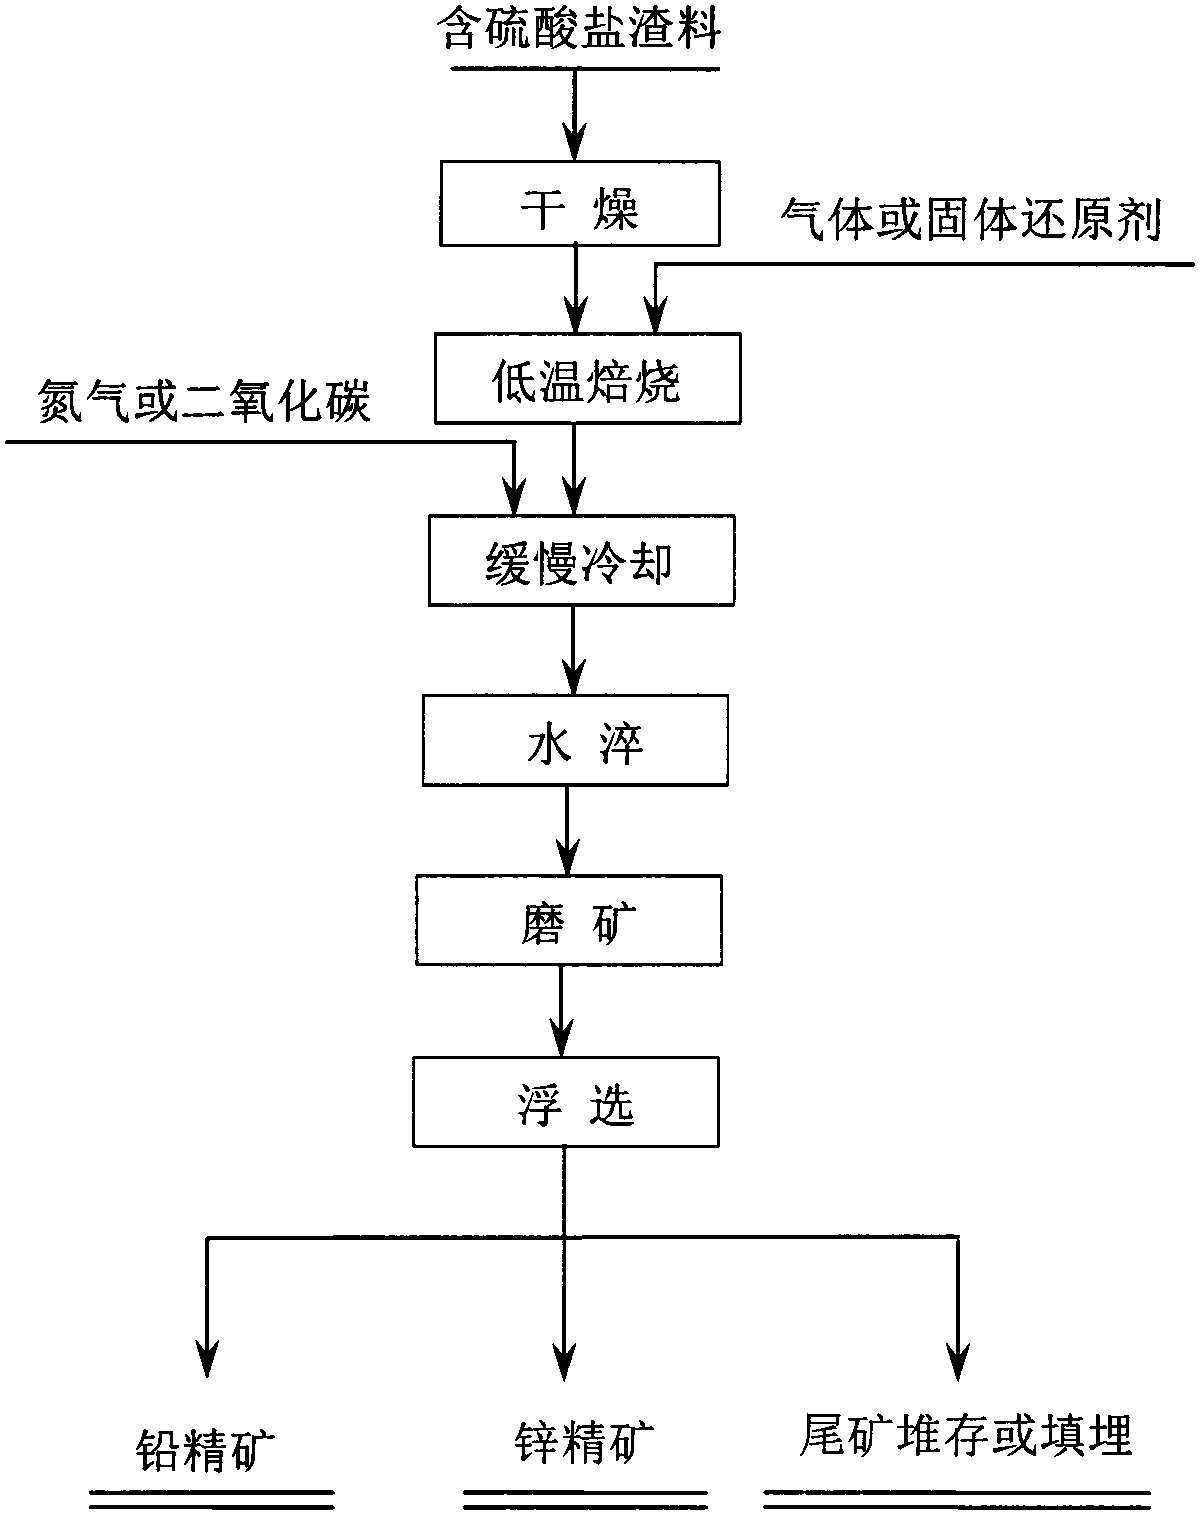 Dressing-smelting combined treatment method for sulfate-containing lead-zinc smelting slags